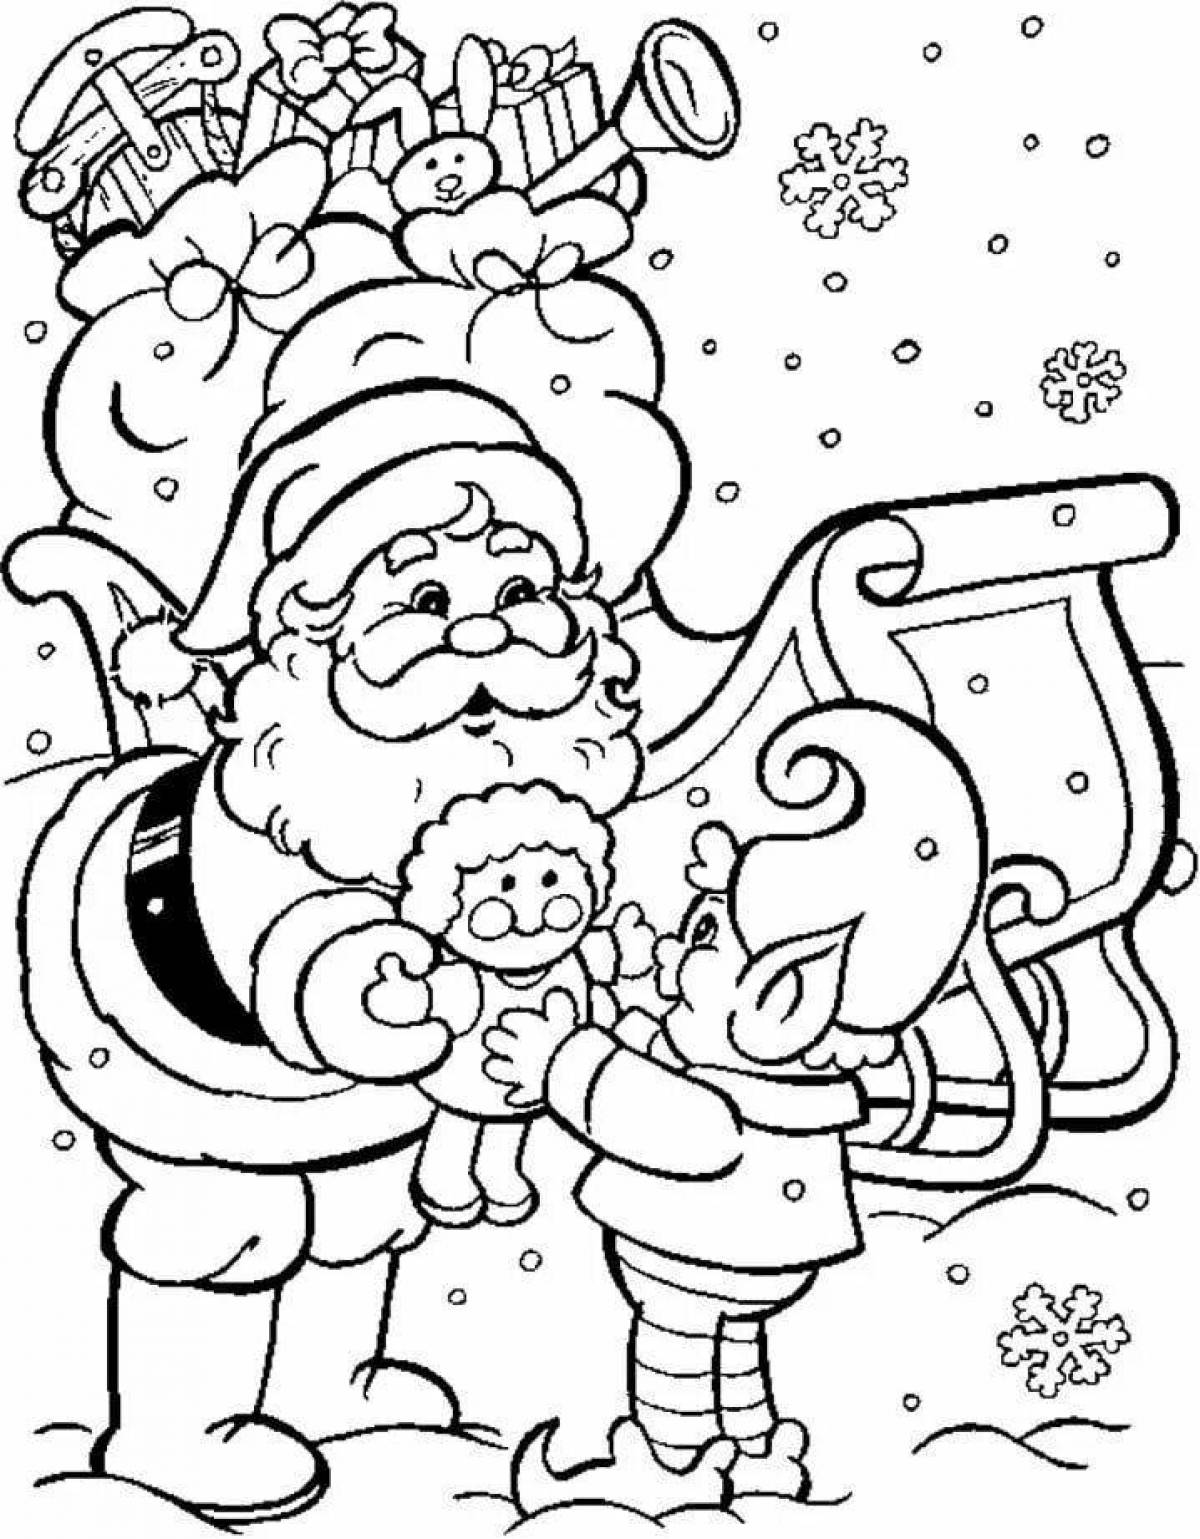 Animated card with santa claus